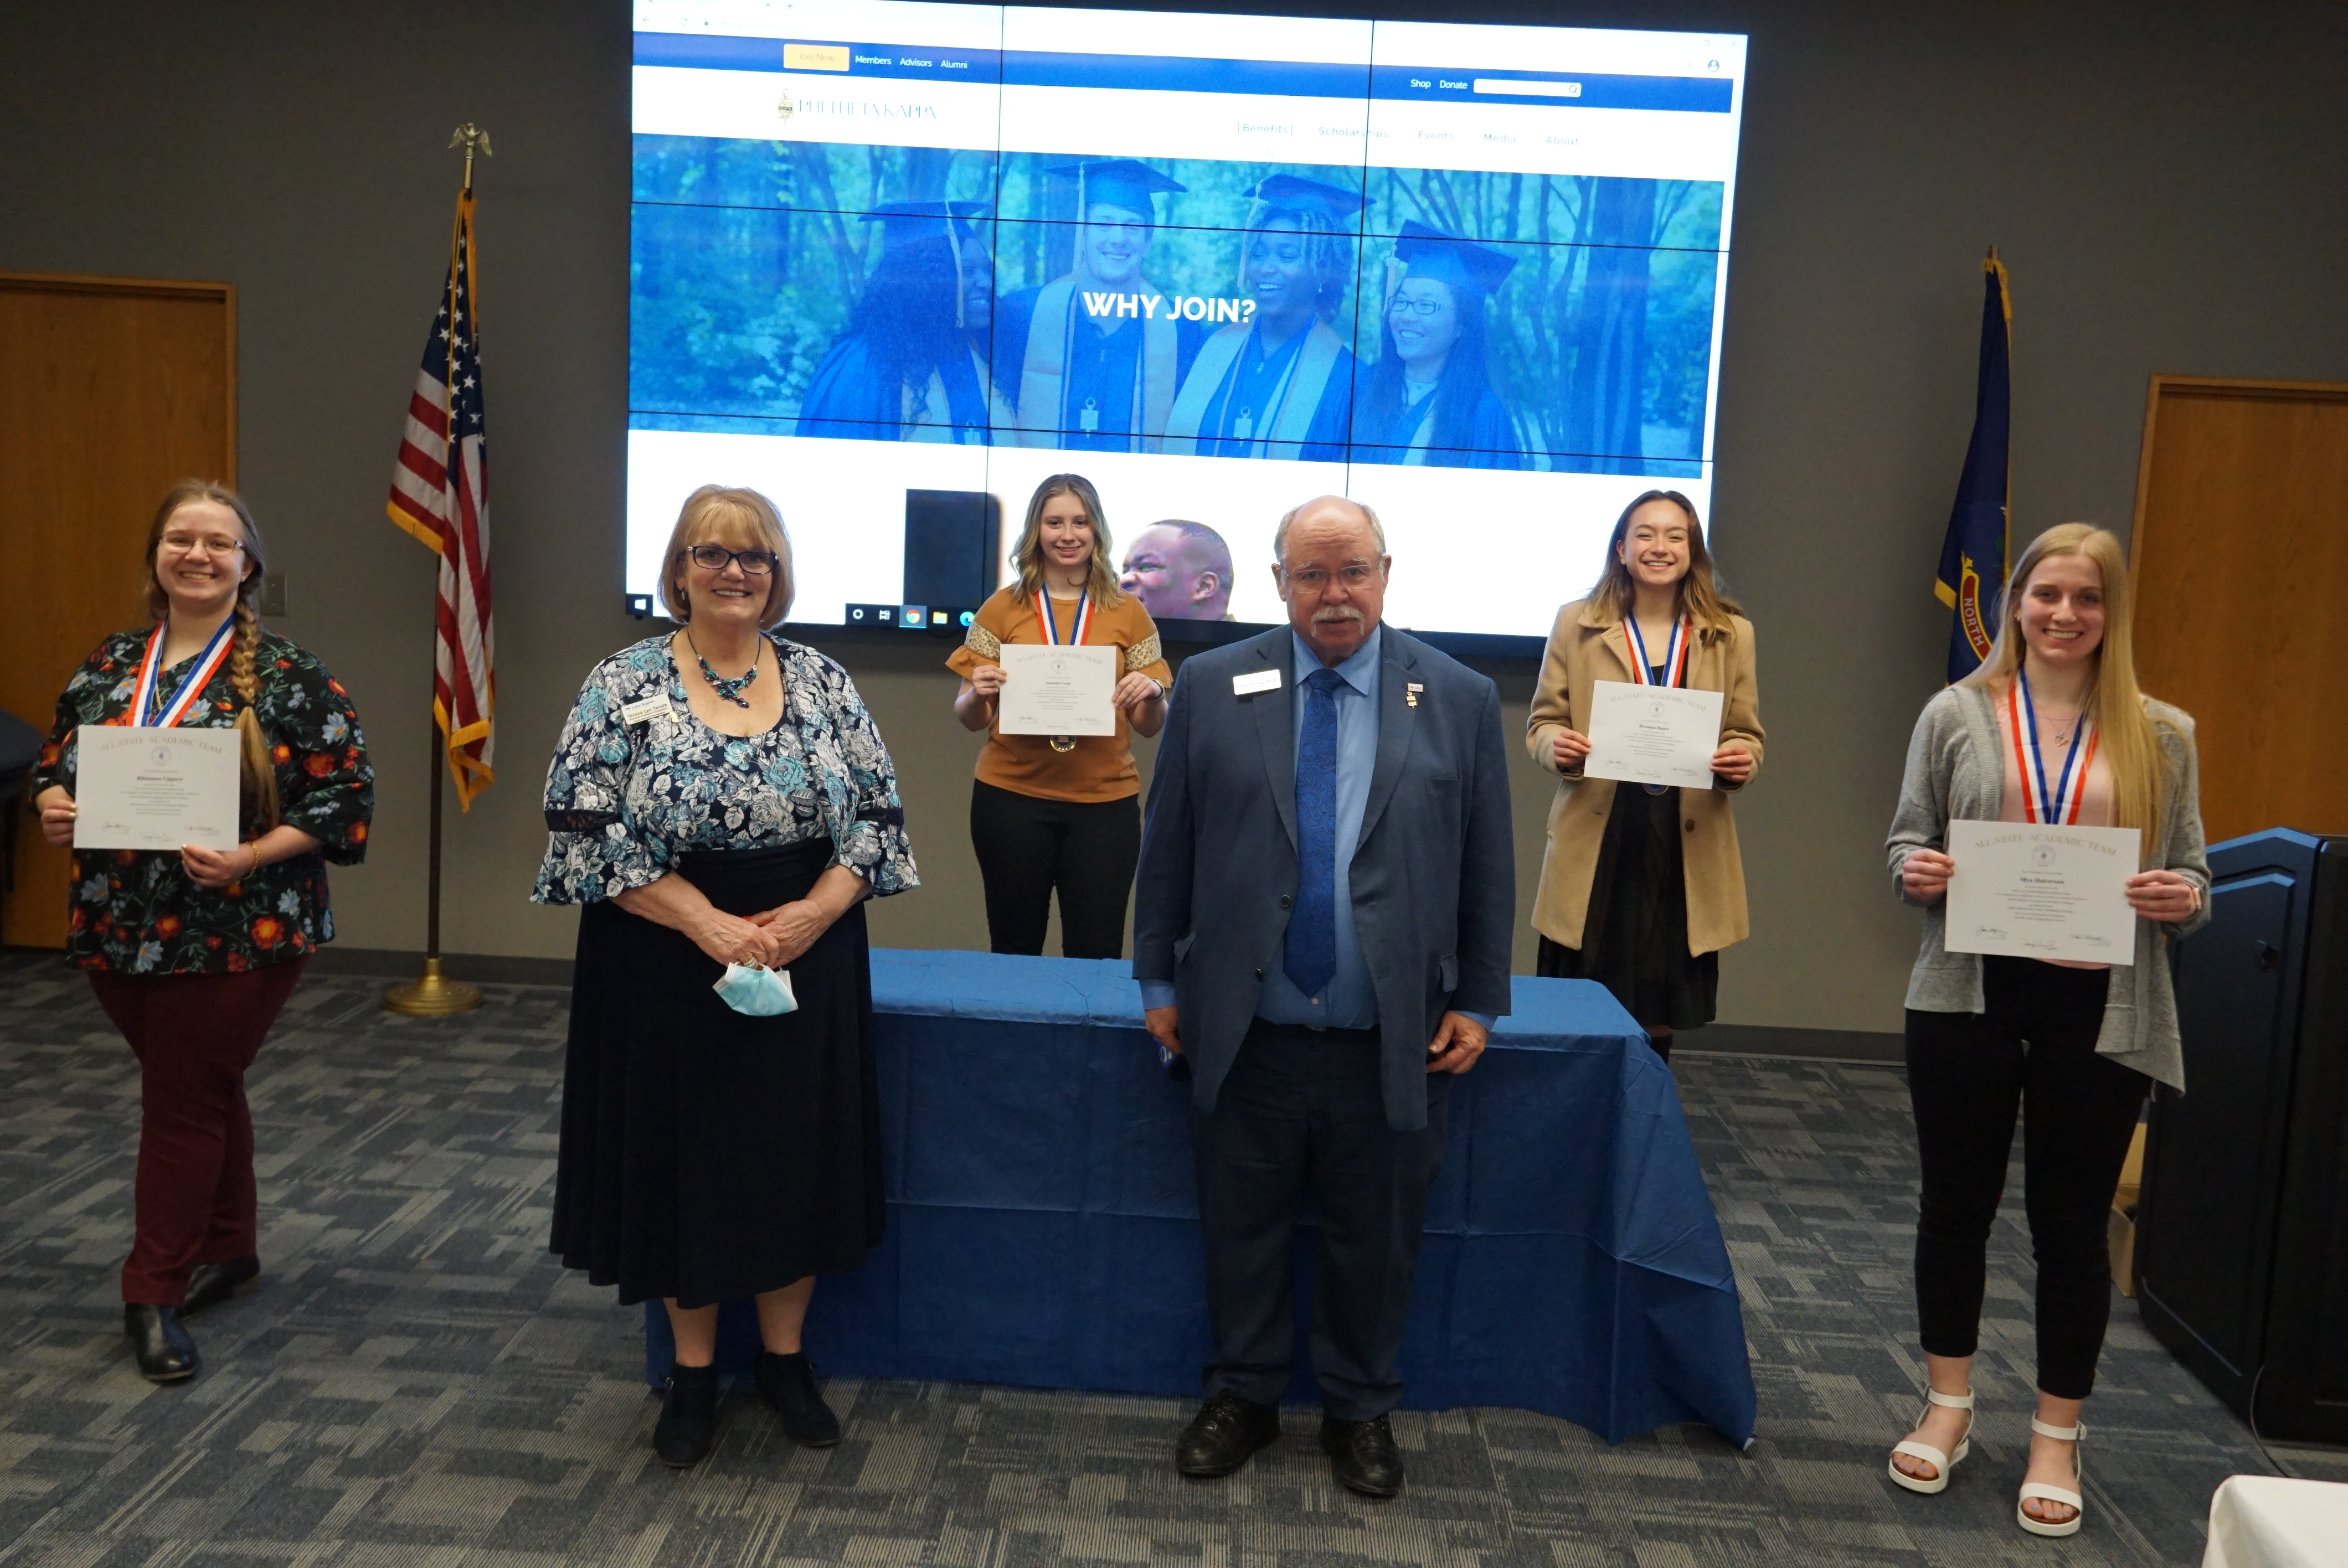 Left to right: Amanda Lang and Breonna Rance Front left to right Rhiannon Giguere, Teresa Tande, Dr. Doug Darling, Mya Halverson